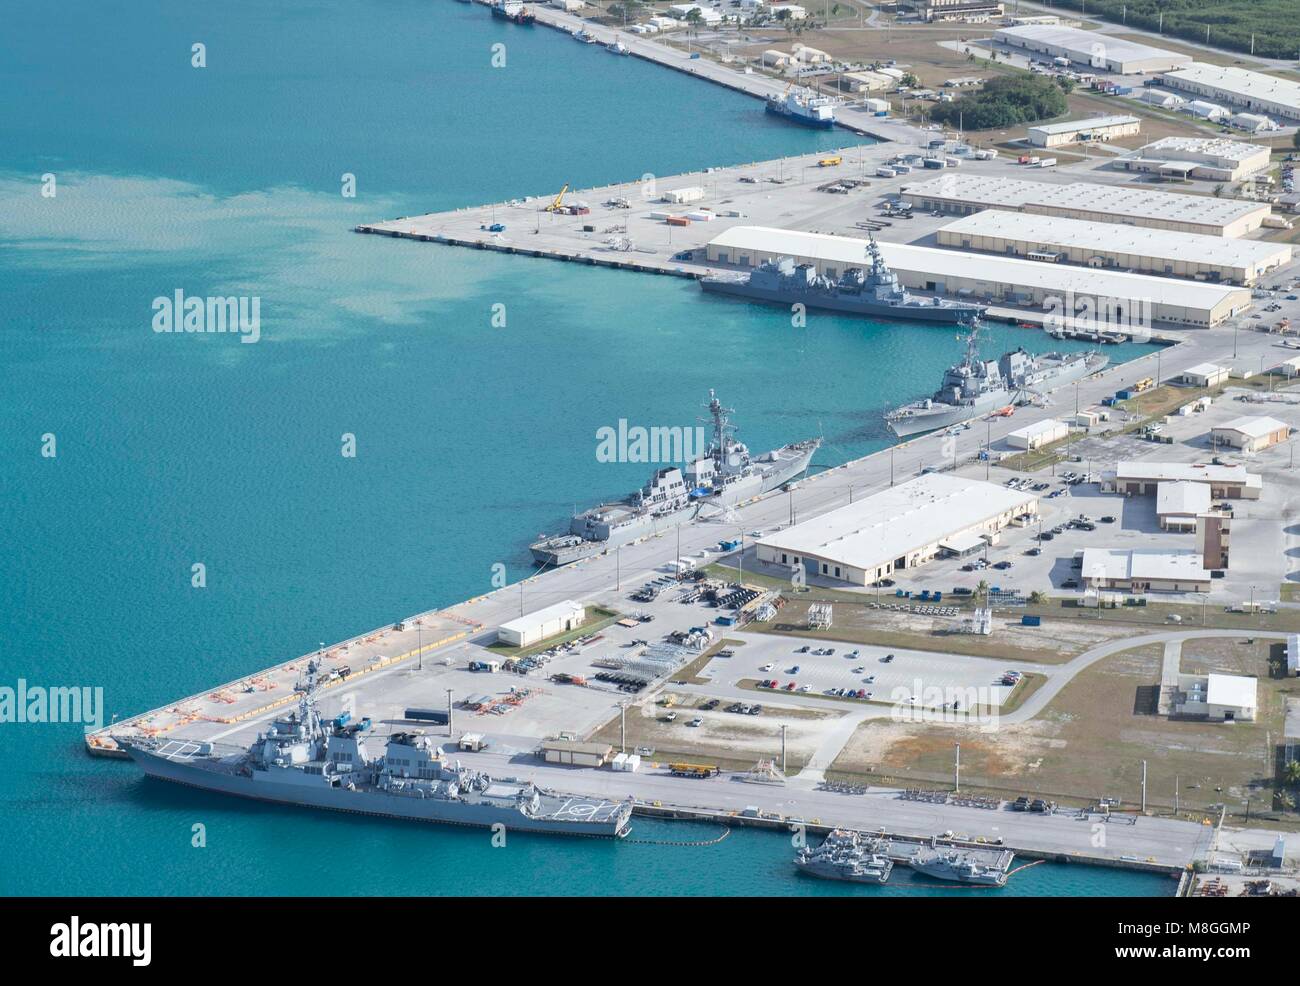 An aerial view of U.S. Naval Base Guam shows several Navy vessels moored in Apra Harbor, March 15. Some of the vessels are in Guam in support of Multi-Sail 2018 and Pacific Partnership 2018. This year also marks the 75th anniversary of the establishment of U.S. 7th Fleet. (U.S. Navy photo by Mass Communication Specialist 3rd Class Alana Langdon) Stock Photo